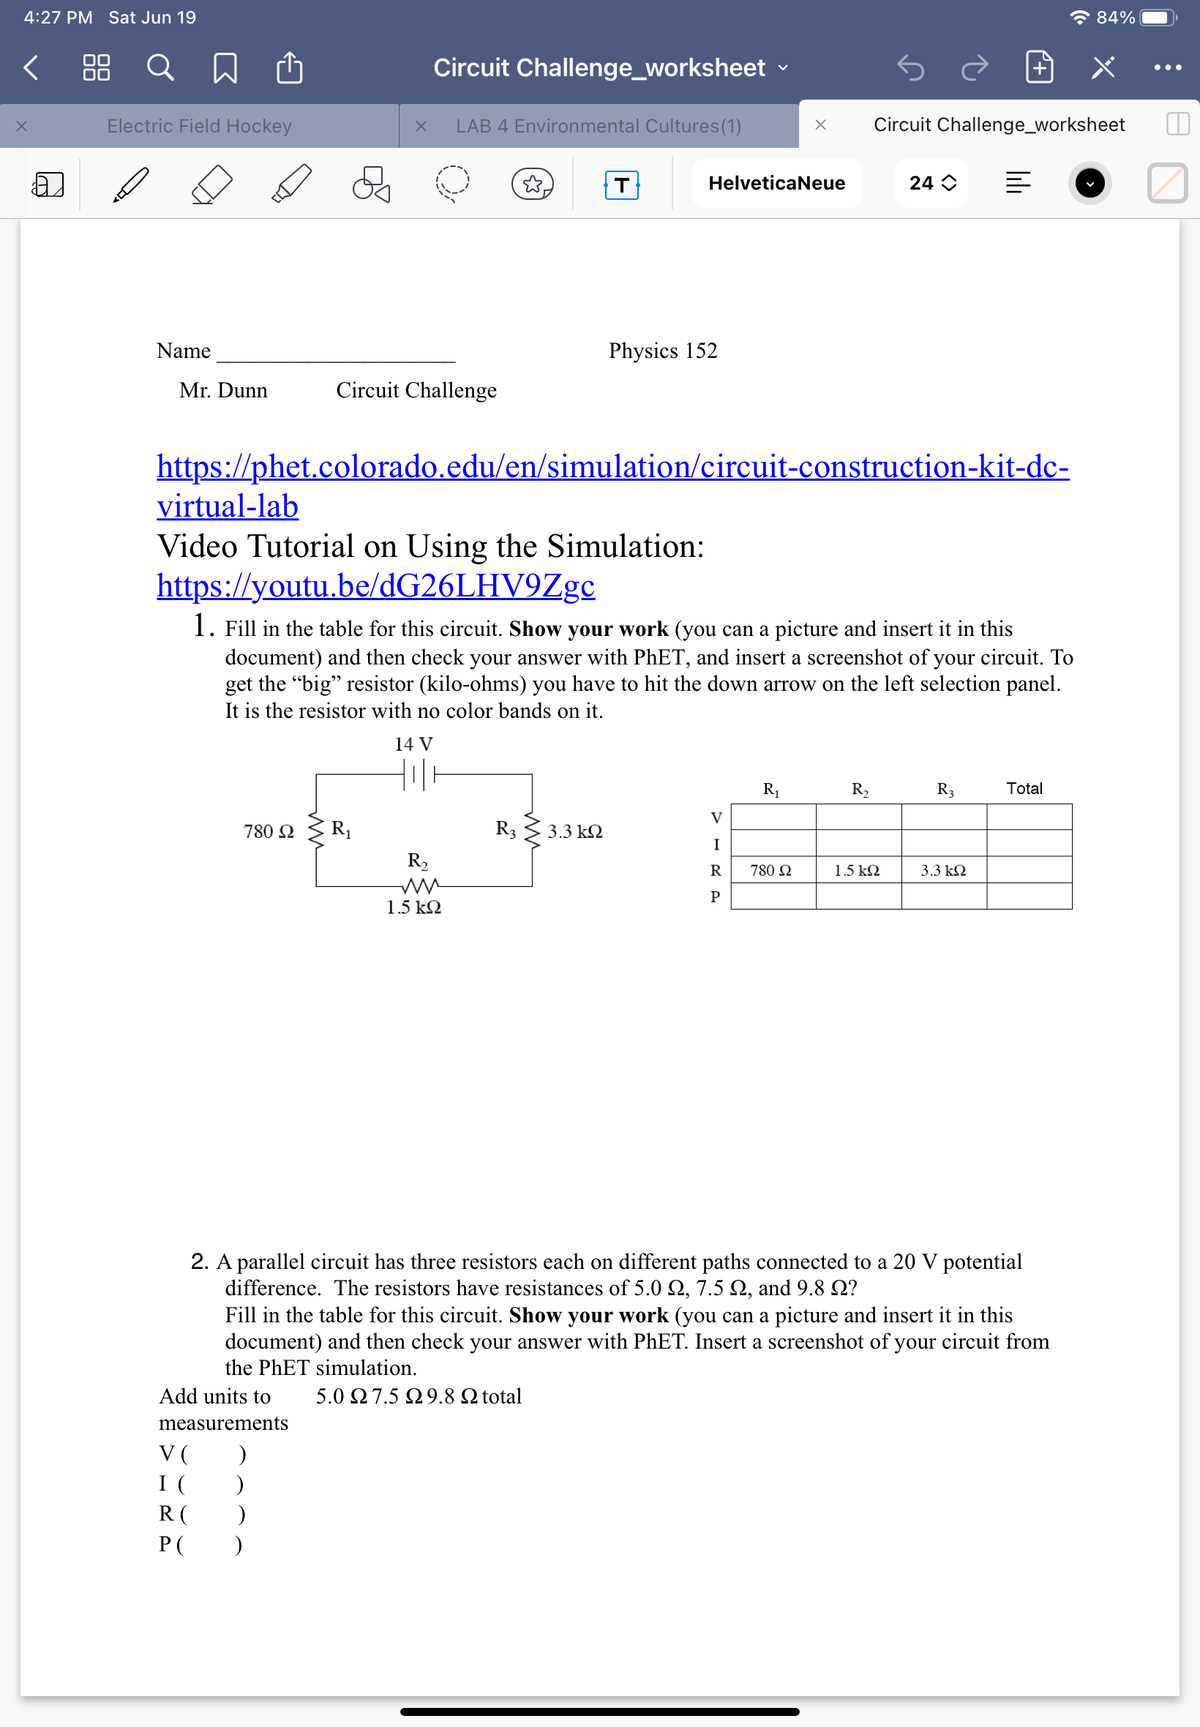 4:27 PM Sat Jun 19
* 84%
< 88 Q
Circuit Challenge_worksheet
•..
Electric Field Hockey
LAB 4 Environmental Cultures(1)
Circuit Challenge_worksheet
Helveticaneue
24 O
Name
Physics 152
Mr. Dunn
Circuit Challenge
https://phet.colorado.edu/en/simulation/circuit-construction-kit-dc-
virtual-lab
Video Tutorial on Using the Simulation:
https://youtu.be/dG26LHV9Zge
1. Fill in the table for this circuit. Show your work (you can a picture and insert it in this
document) and then check your answer with PhET, and insert a screenshot of your circuit. To
get the "big" resistor (kilo-ohms) you have to hit the down arrow on the left selection panel.
It is the resistor with no color bands on it.
14 V
R1
R,
R3
Total
V
780 2
R1
R3
3.3 k2
I
R2
R
780 2
1.5 k2
3.3 k2
P
1.5 k2
2. A parallel circuit has three resistors each on different paths connected to a 20 V potential
difference. The resistors have resistances of 5.0 Q, 7.5 N, and 9.8 2?
Fill in the table for this circuit. Show your work (you can a picture and insert it in this
document) and then check your answer with PhET. Insert a screenshot of your circuit from
the PHET simulation.
Add units to
5.0 Ω 7.5 Ω9.8 Ω total
measurements
V (
I (
R (
P( )
lili
